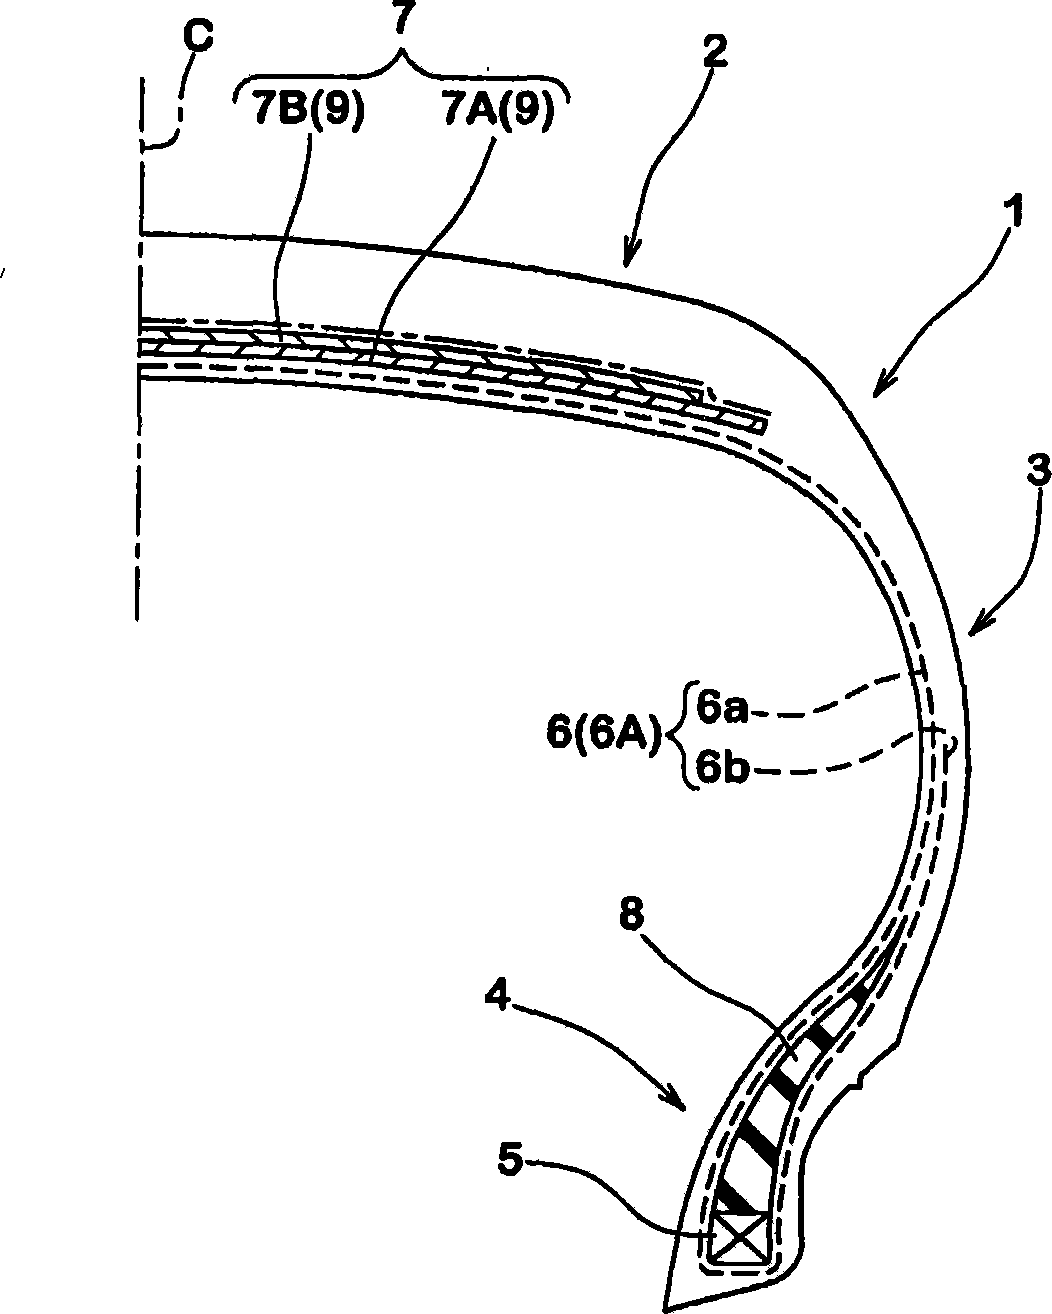 Metallic cord, rubber/cord composite object, and pneumatic tire obtained using the same